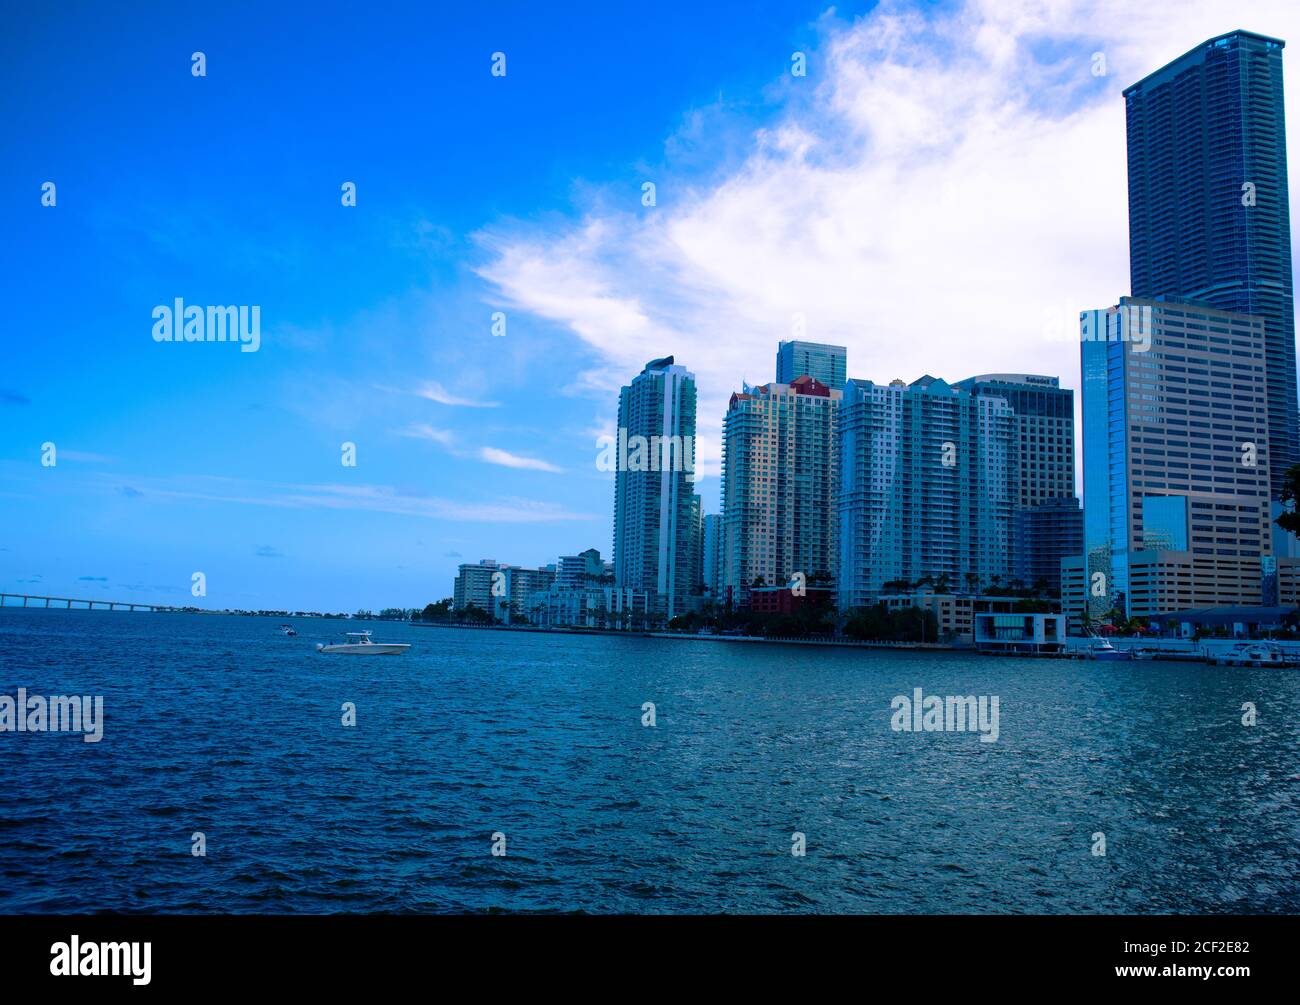 View of buildings next to the Miami South Channel in Brickell Miami, Florida during the day time, Skyline of Brickell near the the Miami South Channel Stock Photo